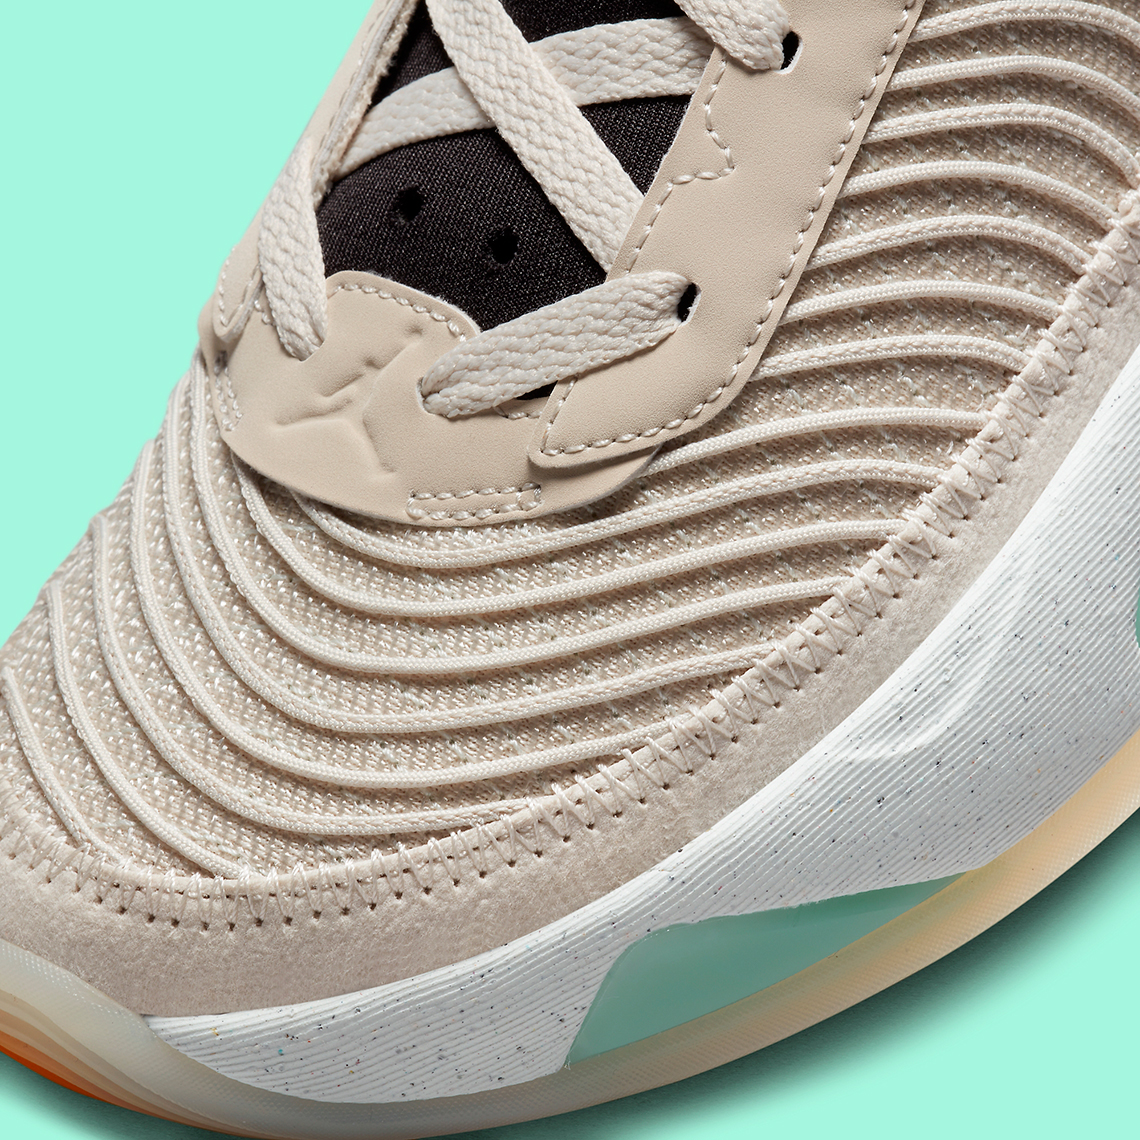 The Air Jordan 30 is expected to first debut during this year's Tan Citrus Dr9830 130 5